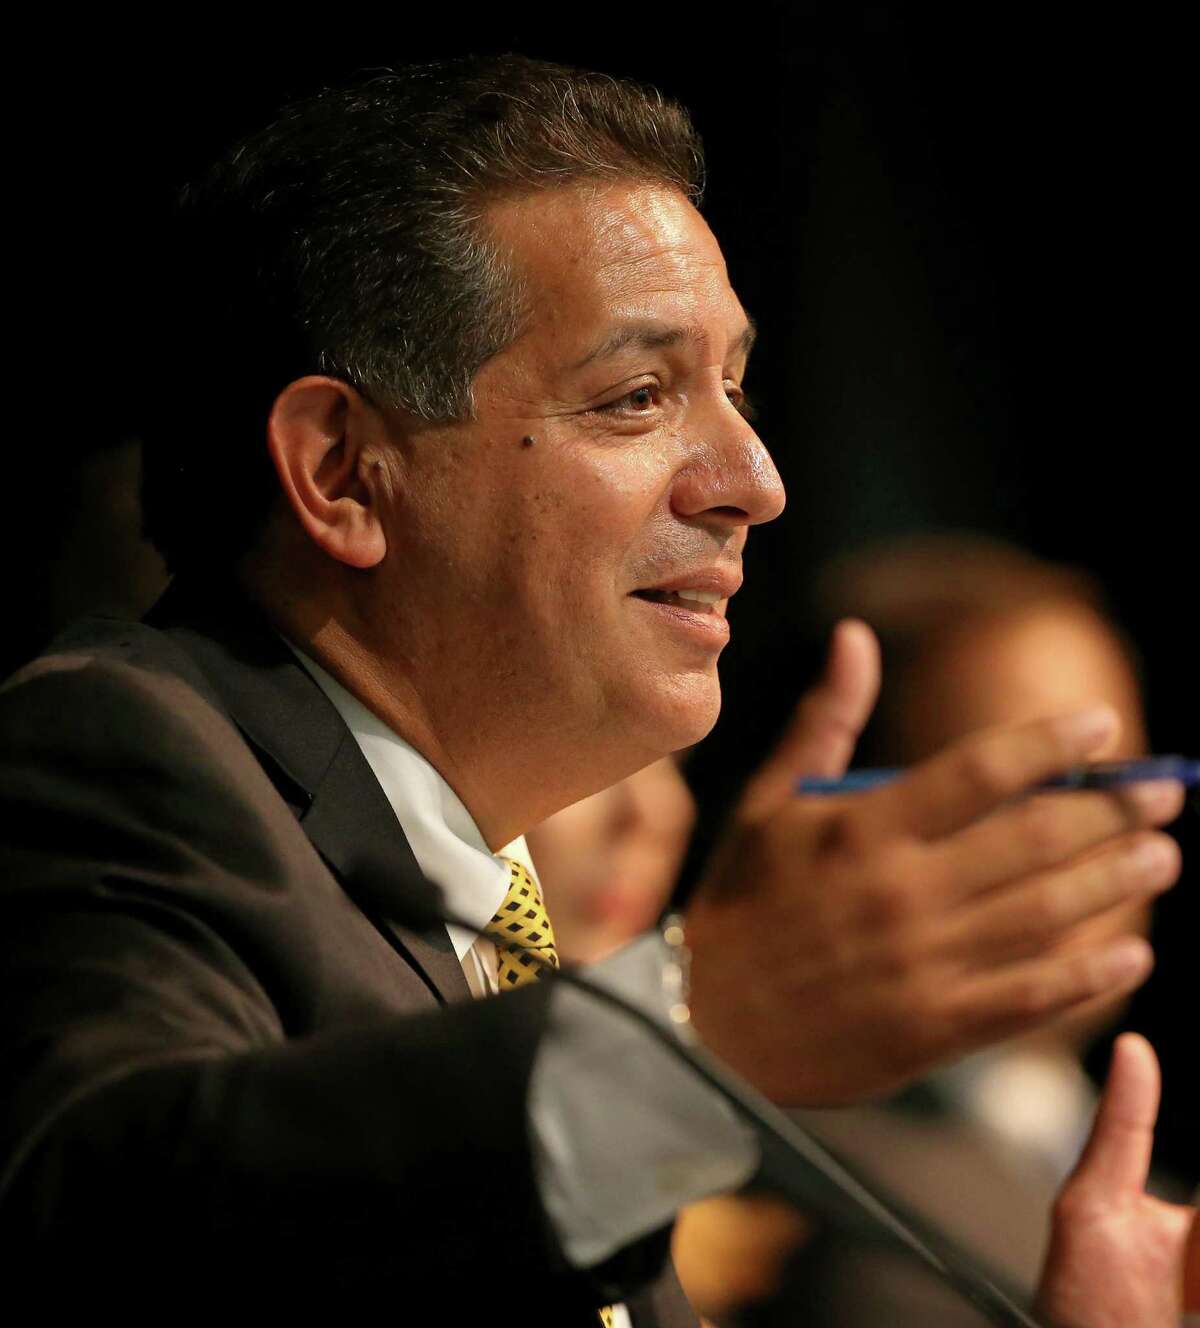 Then-state Rep. John Lujan speaks during the Committee on County Affairs hearing held Monday Aug. 29, 2016 at Texas A&M University San Antonio. Lujan is a Republican running in a special election for House District 118.